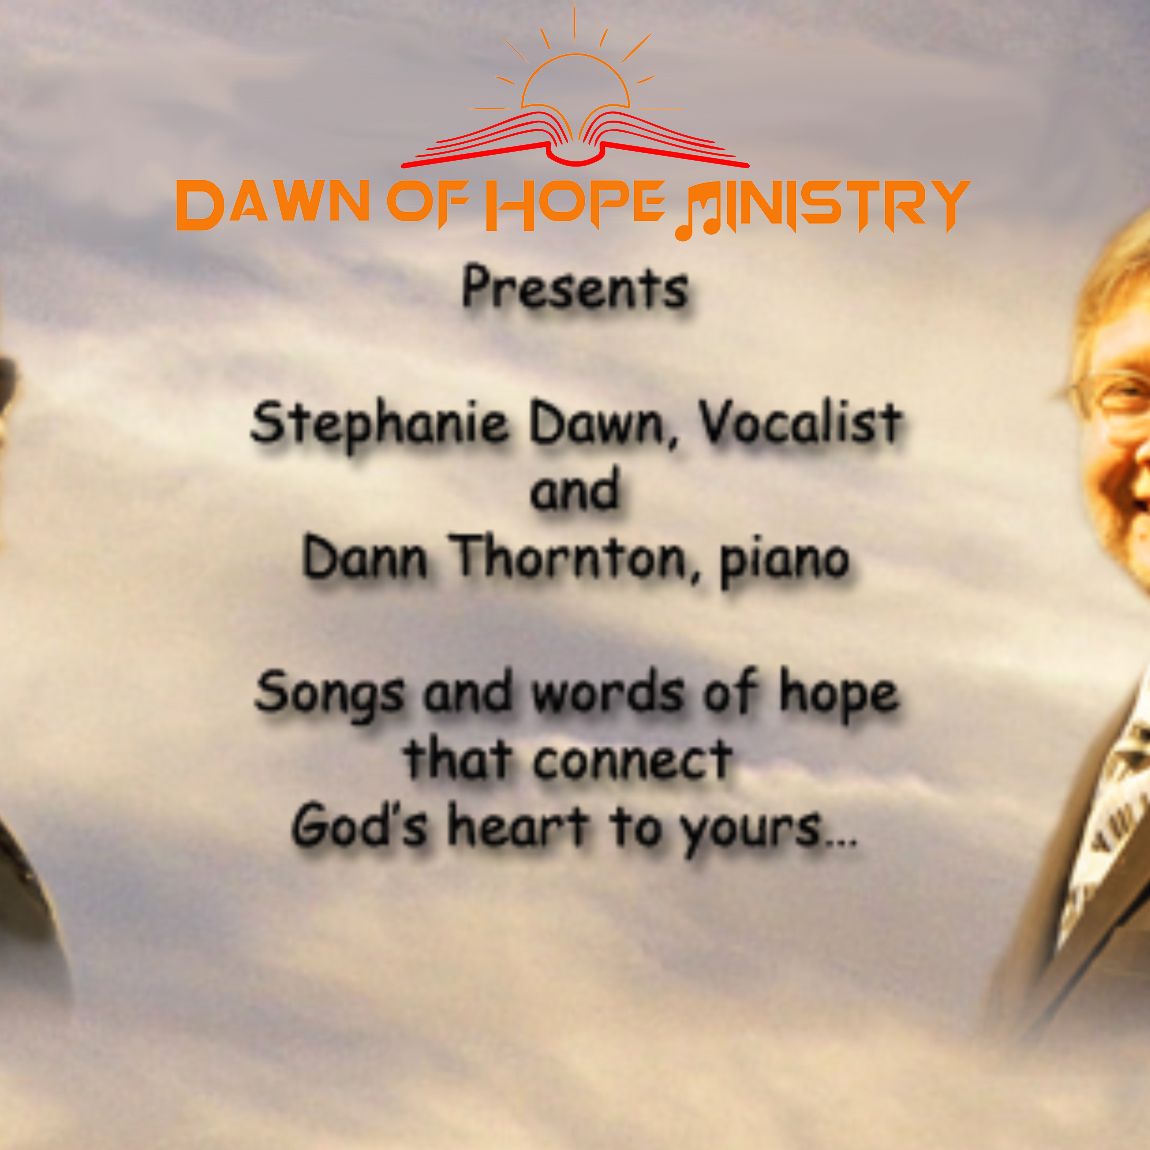 Dawn of Hope Ministry